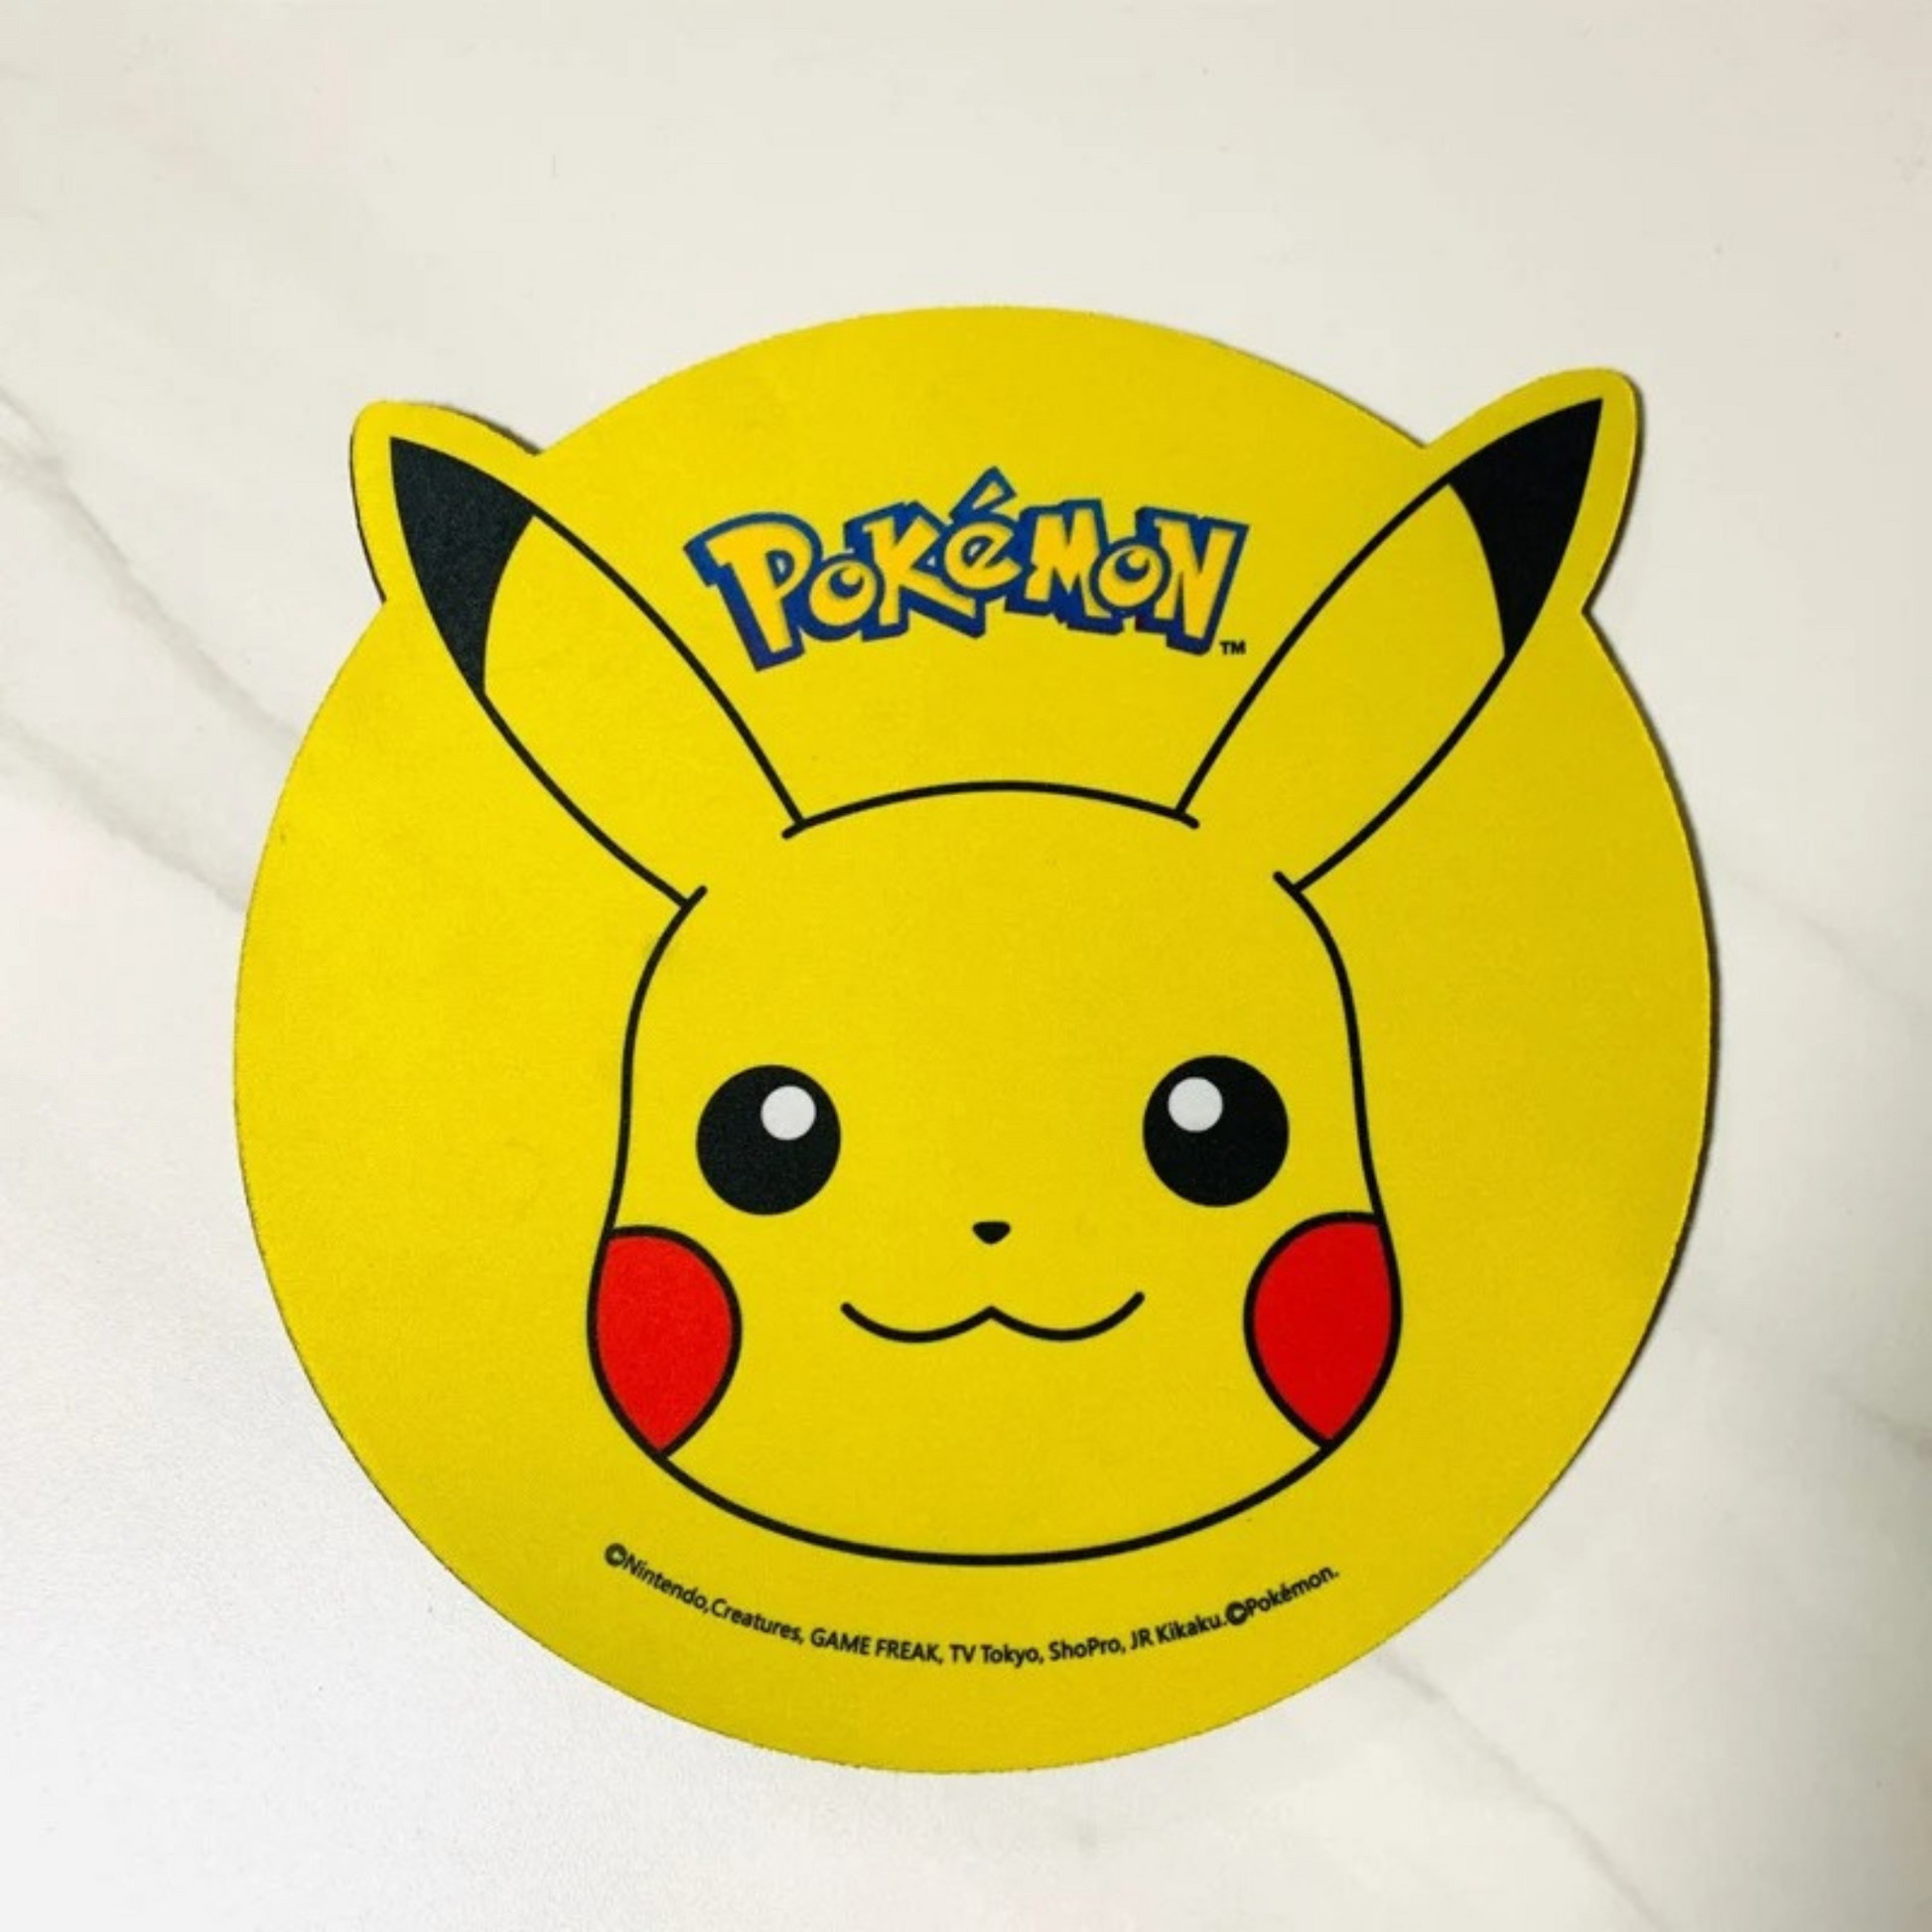 Mouse pad design - Pikachu Pokémon mouse wireless bluetooth connection with official premium nintendo quality, perfect gift for pokemon fans